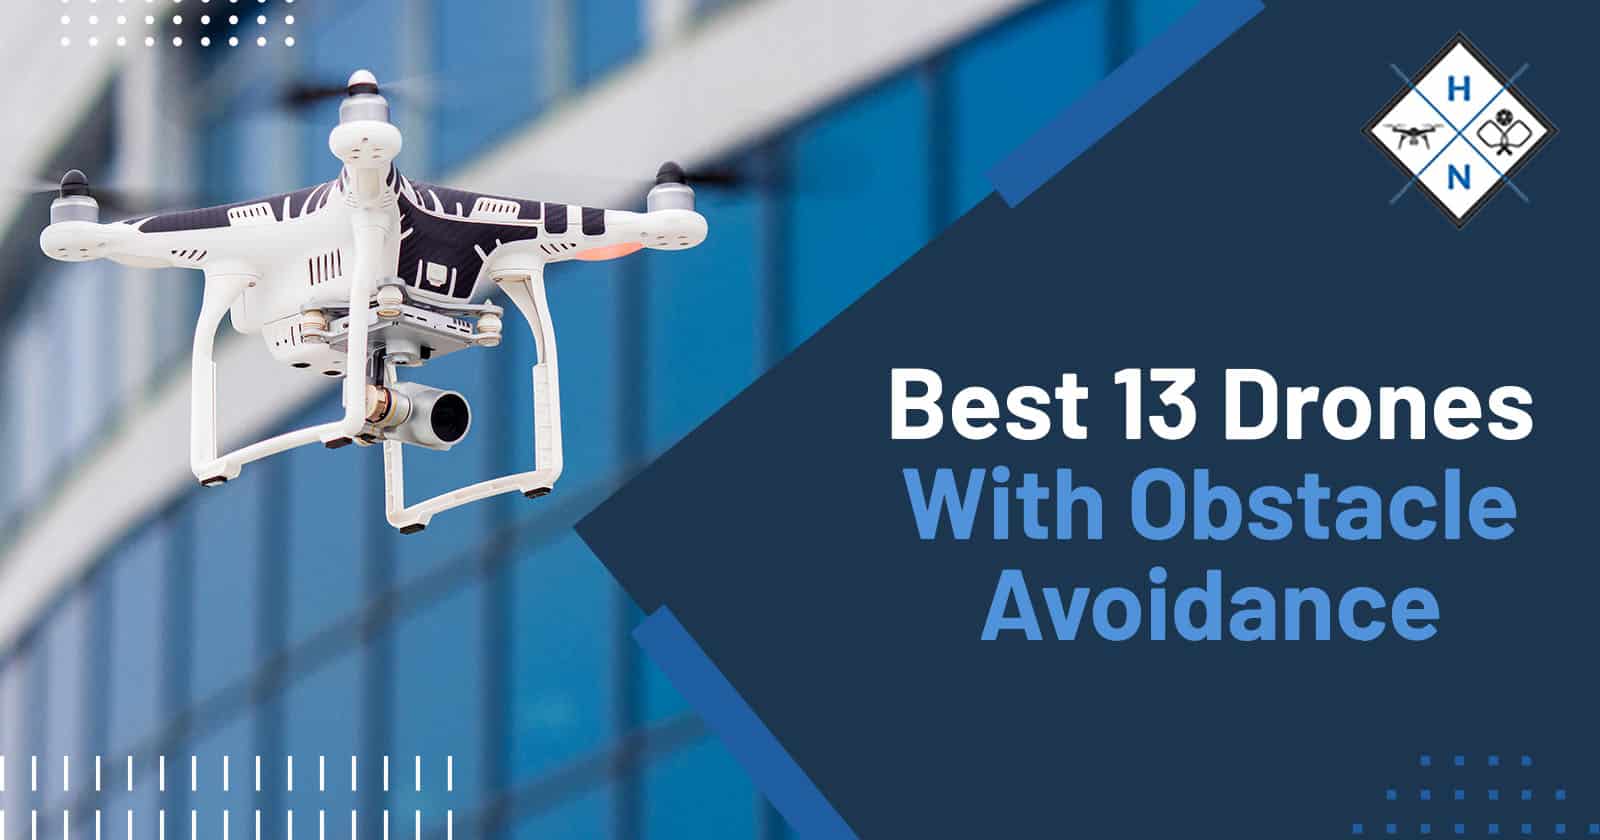 Best 13 Drones With Obstacle Avoidance for 2022